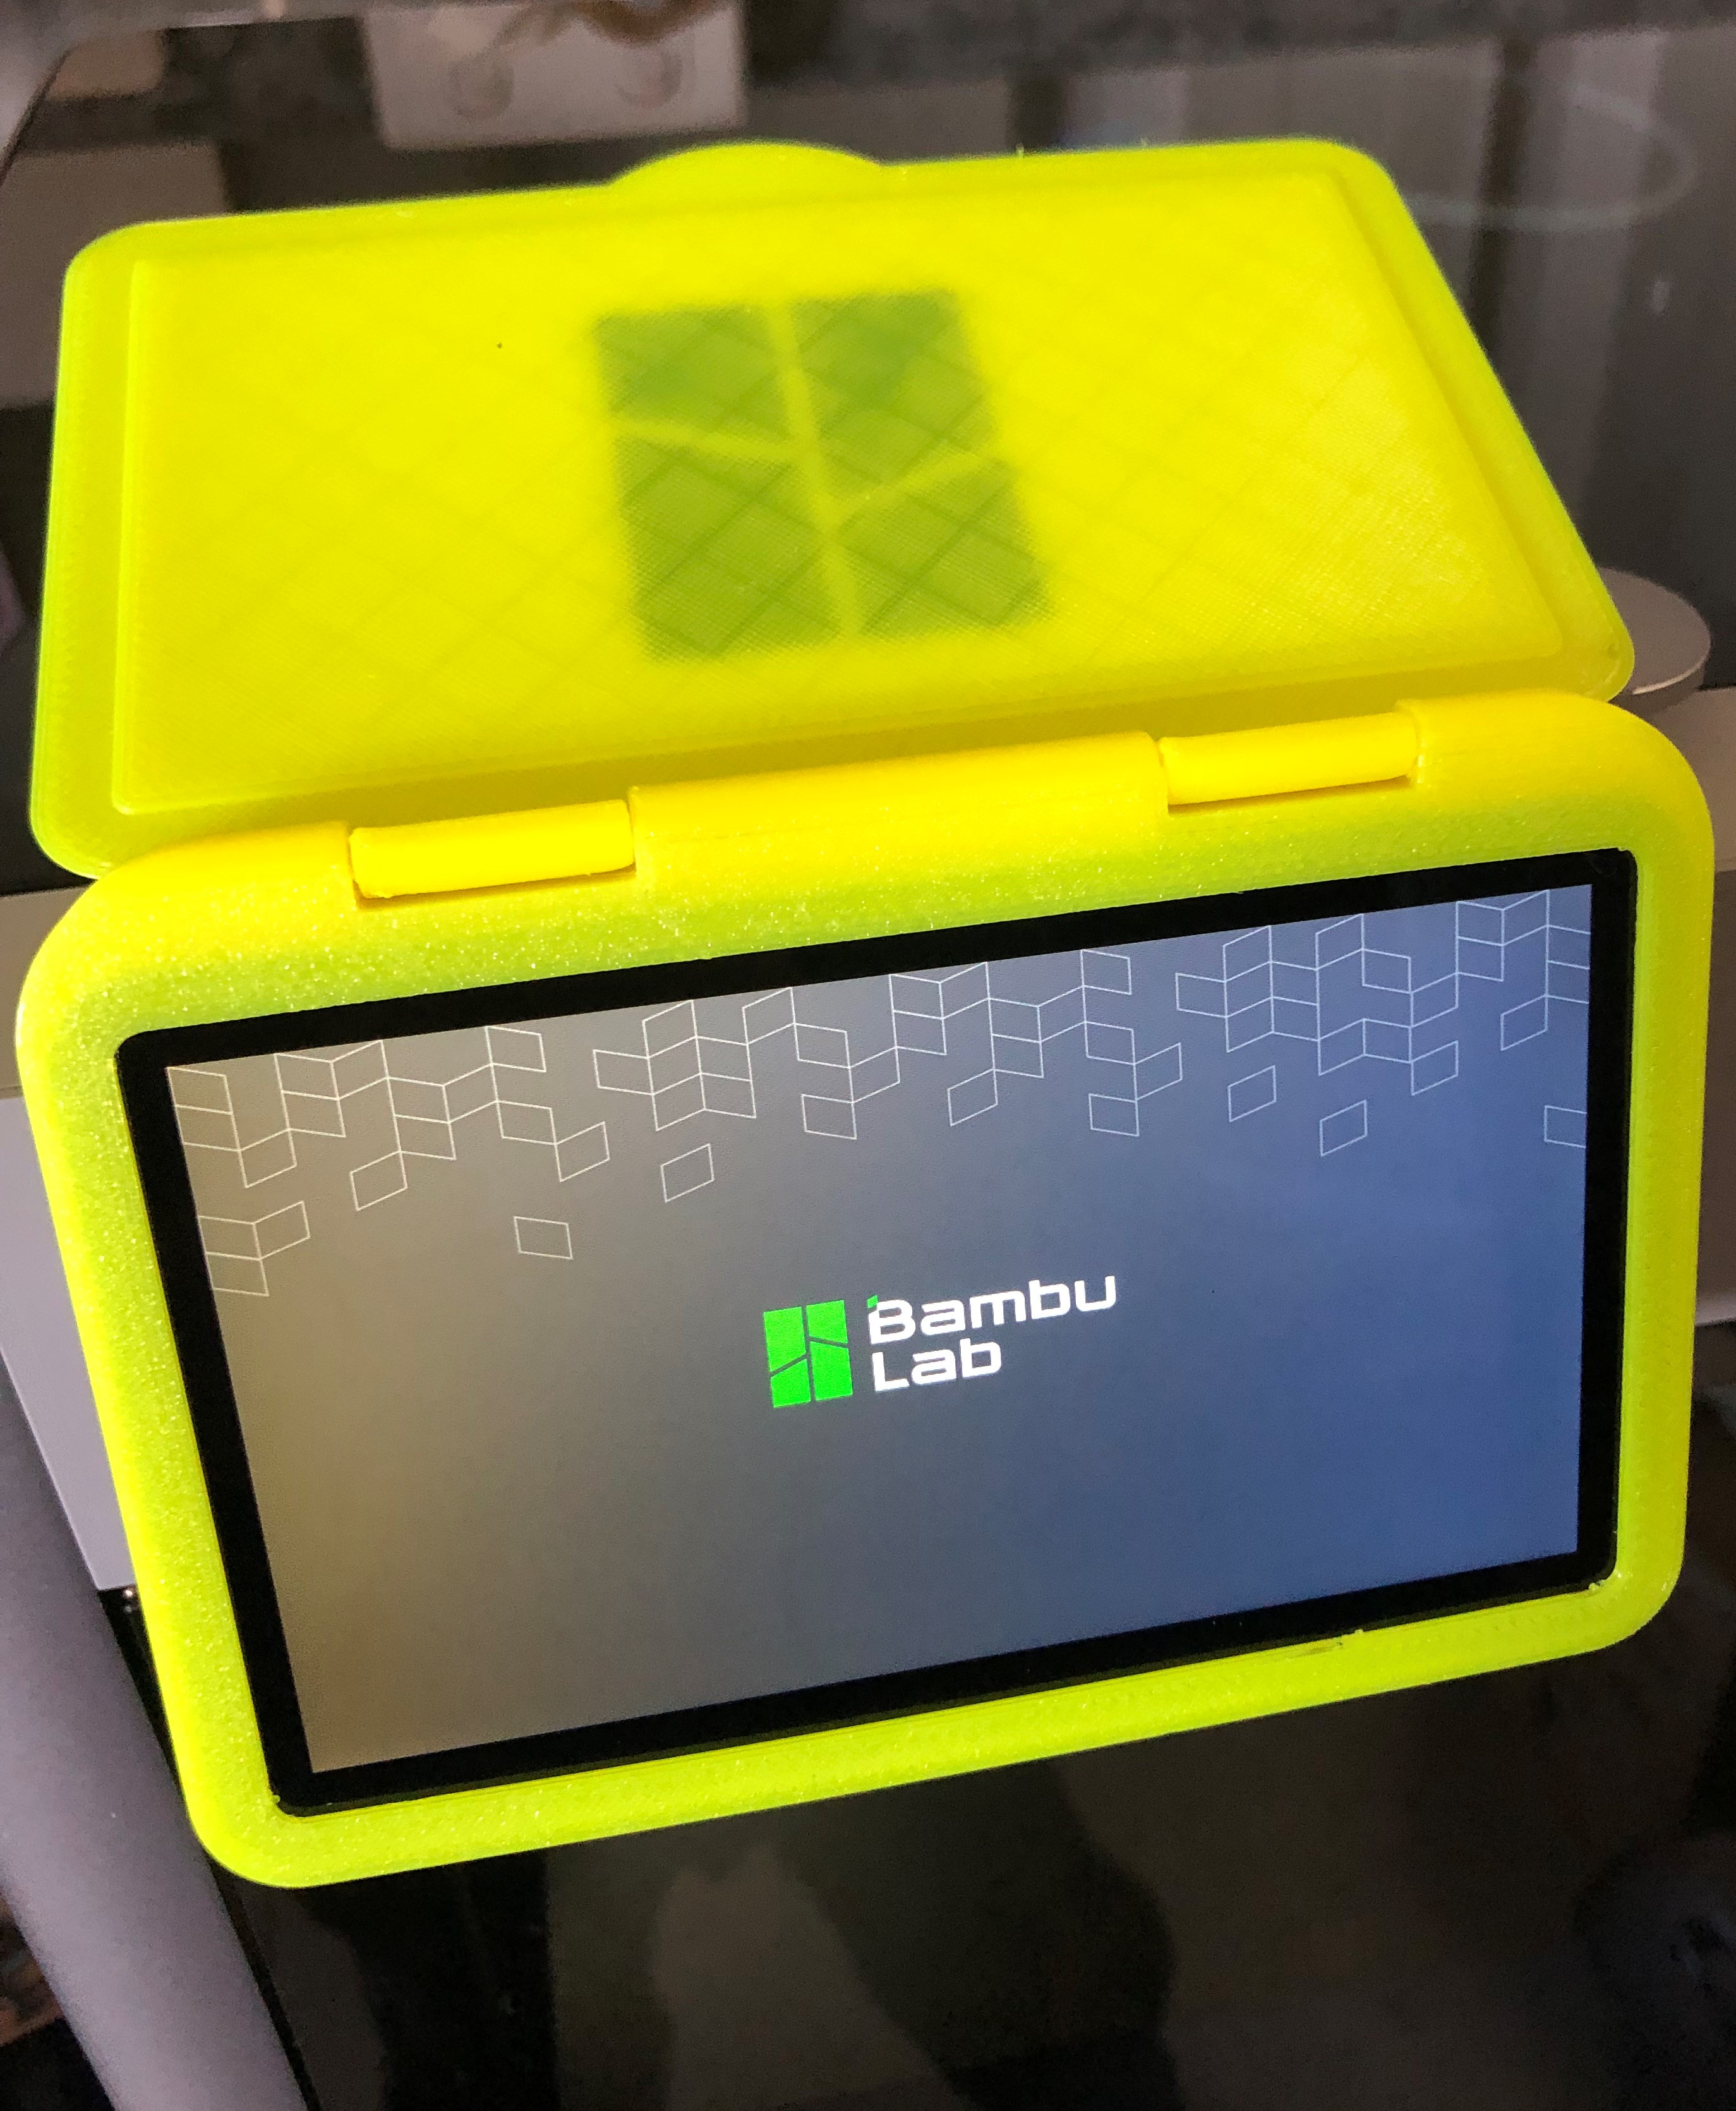 A1 screen protector / dust cover I made : r/BambuLab